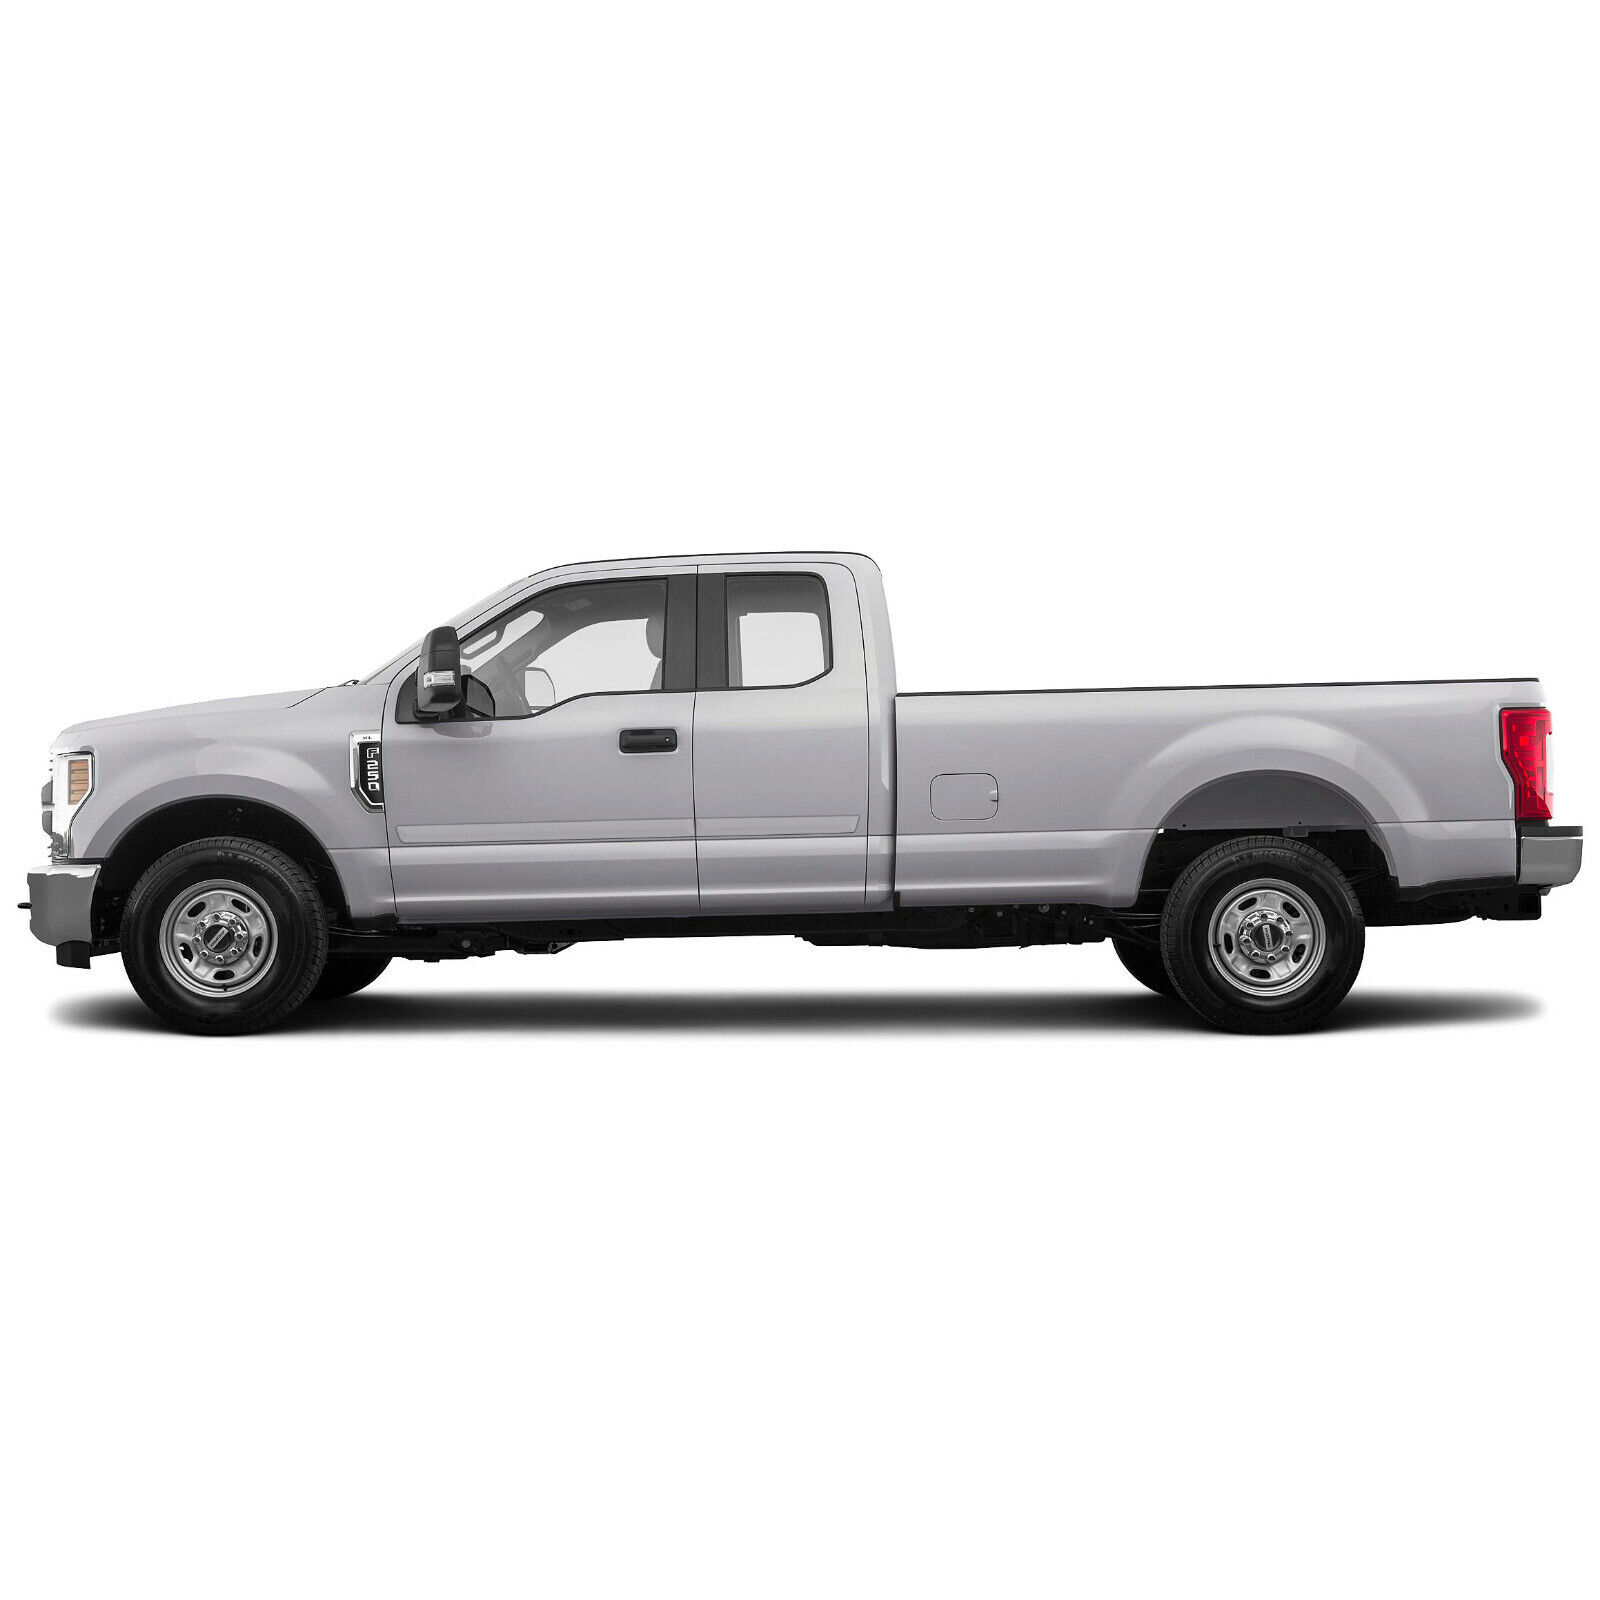 PAINTED BODY SIDE Moldings TRIM Mouldings For: FORD F-350 SD EXT CAB 2017-2019